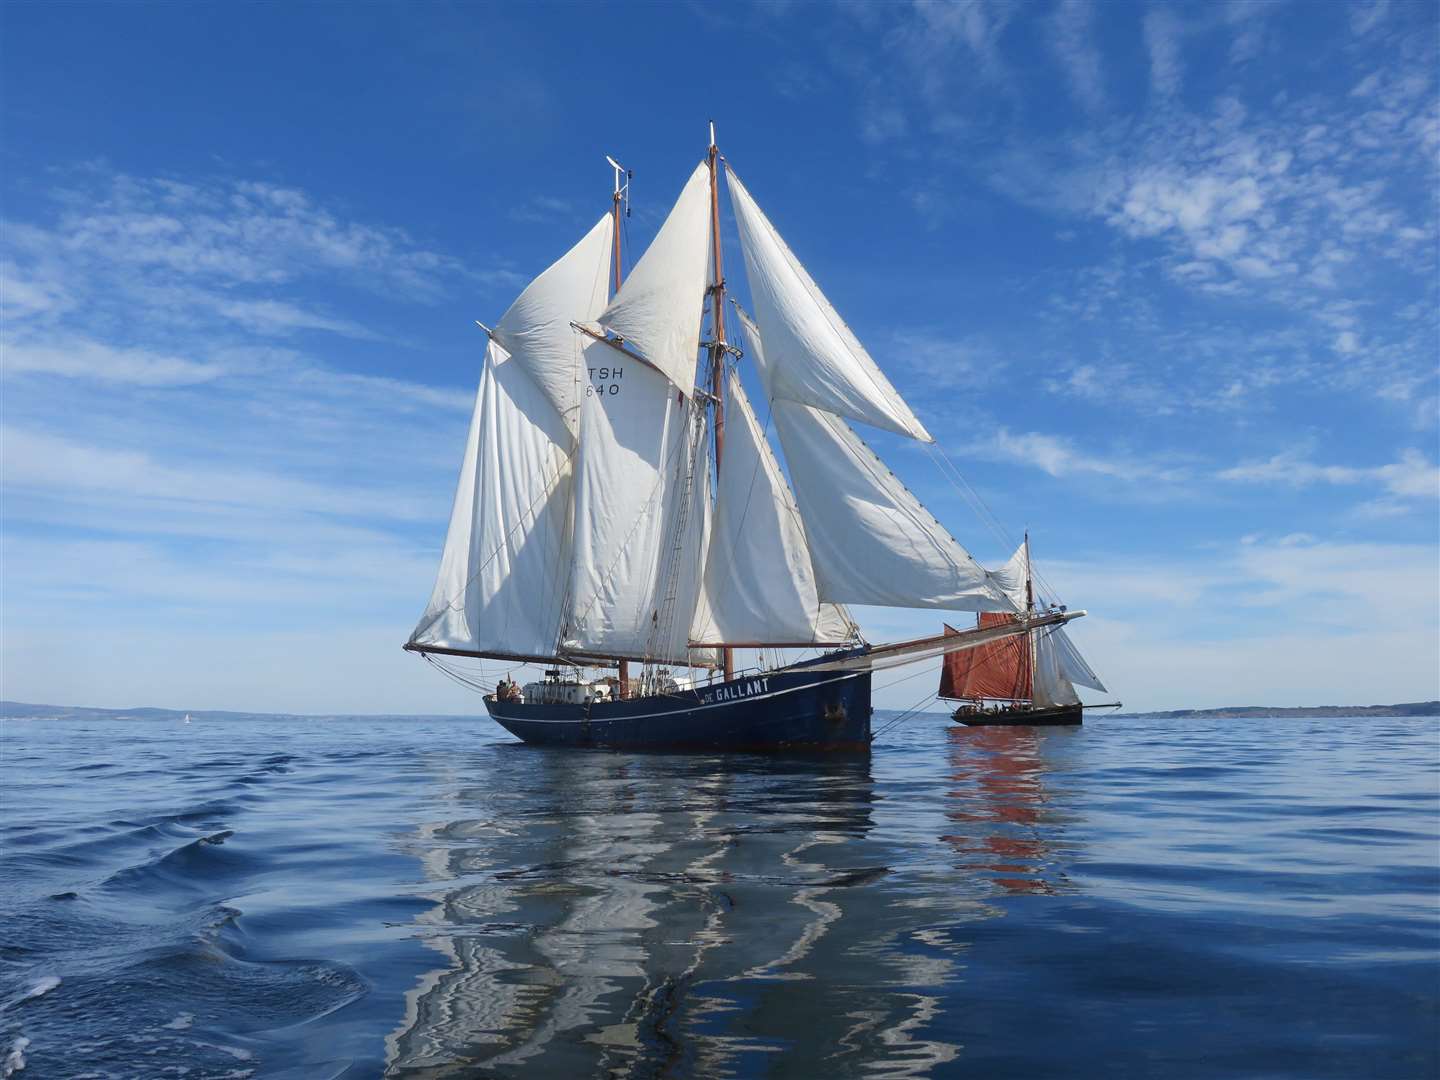 The ship has been travelling across the world for 100 years. Photo by Blue Schooner Company